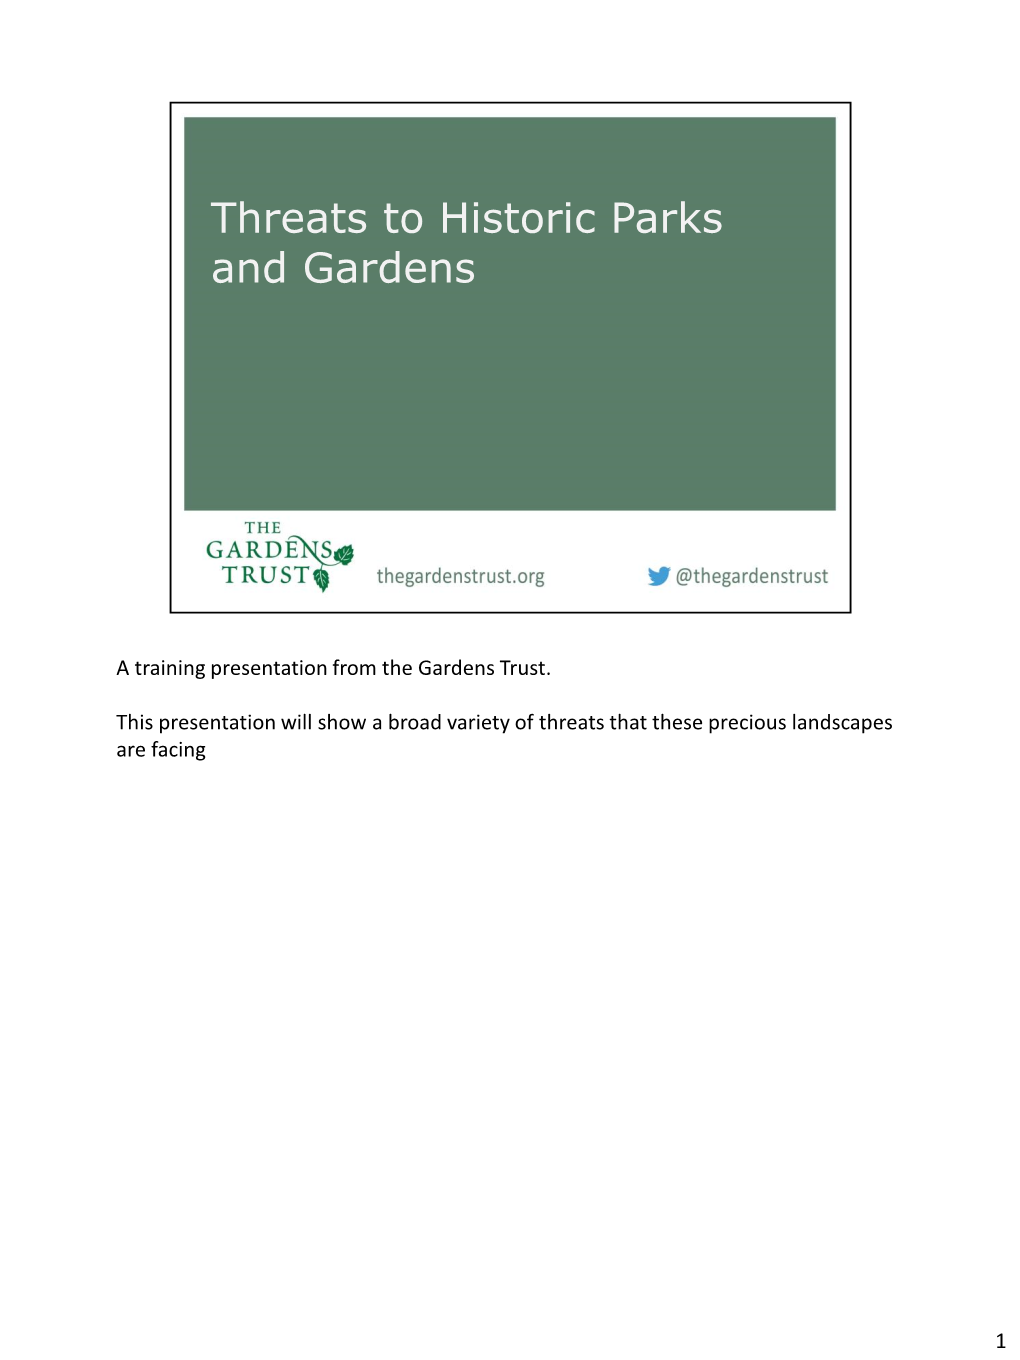 Threats to Historic Parks and Gardens